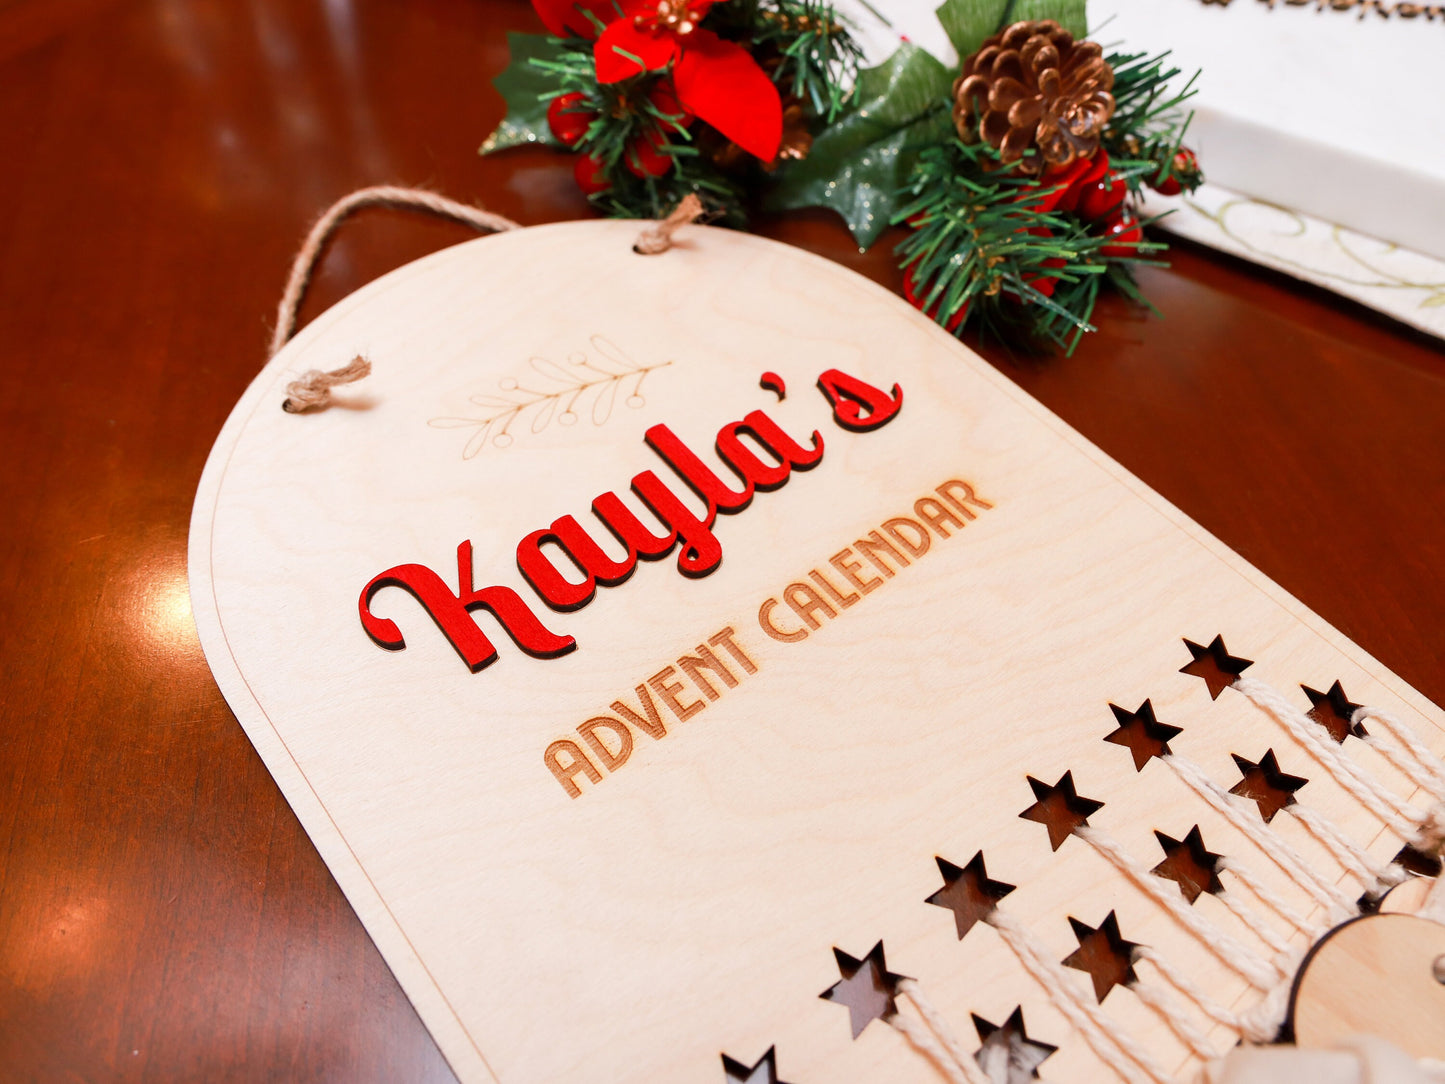 DIY Wood Advent Calendar with Personalized Name - Custom Christmas Countdown Calendar with 12 Cotton Twill Pouches